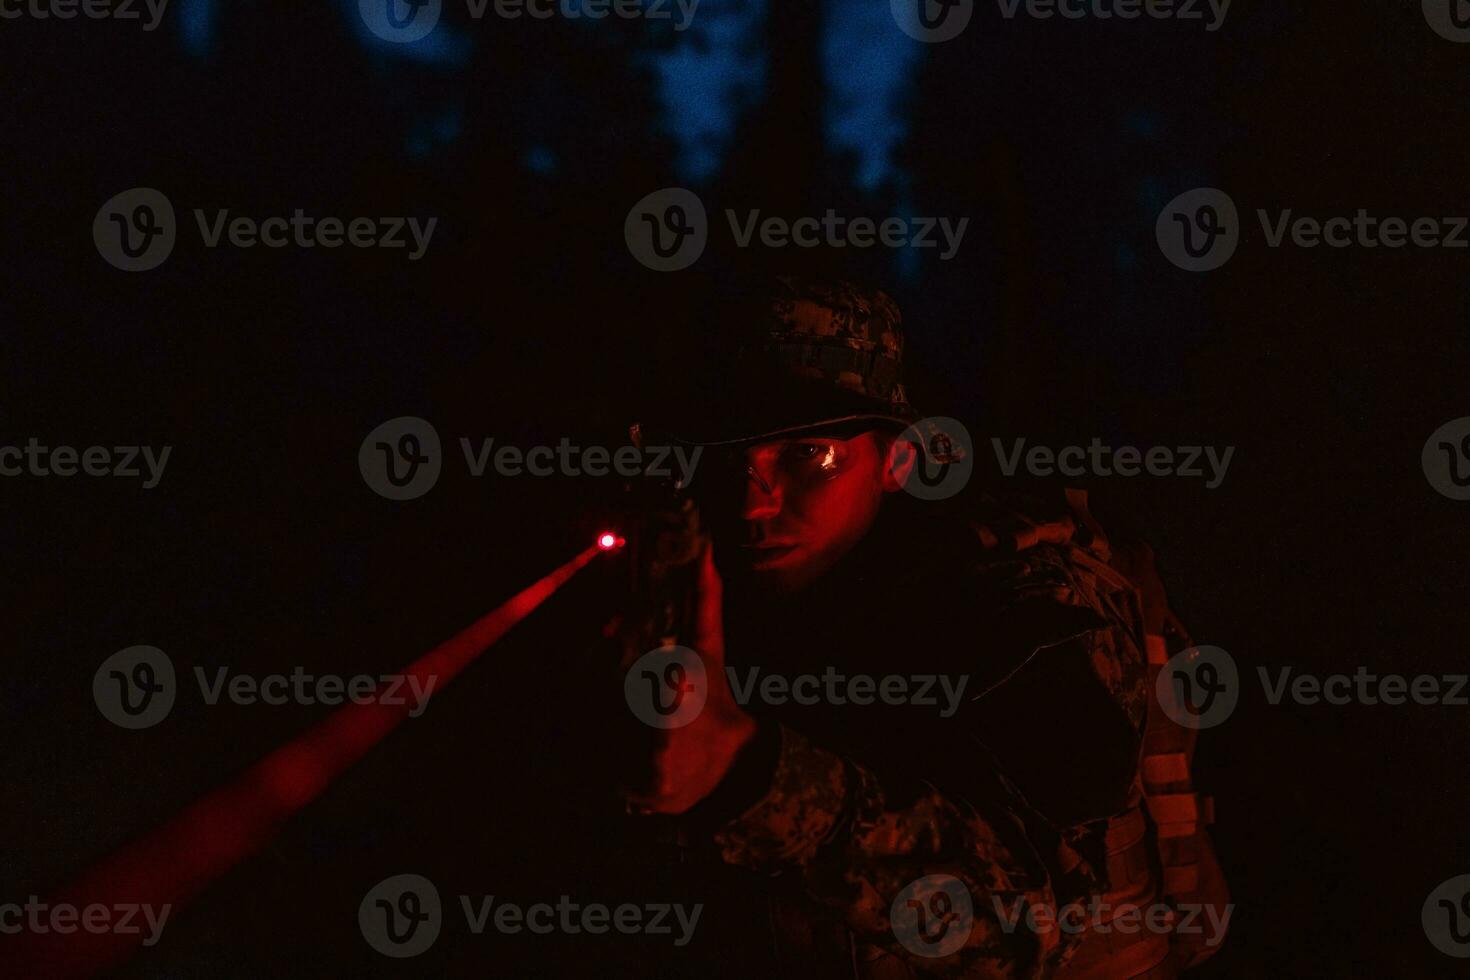 Soldiers squad in action on night mission using laser sight beam lights military team concept photo